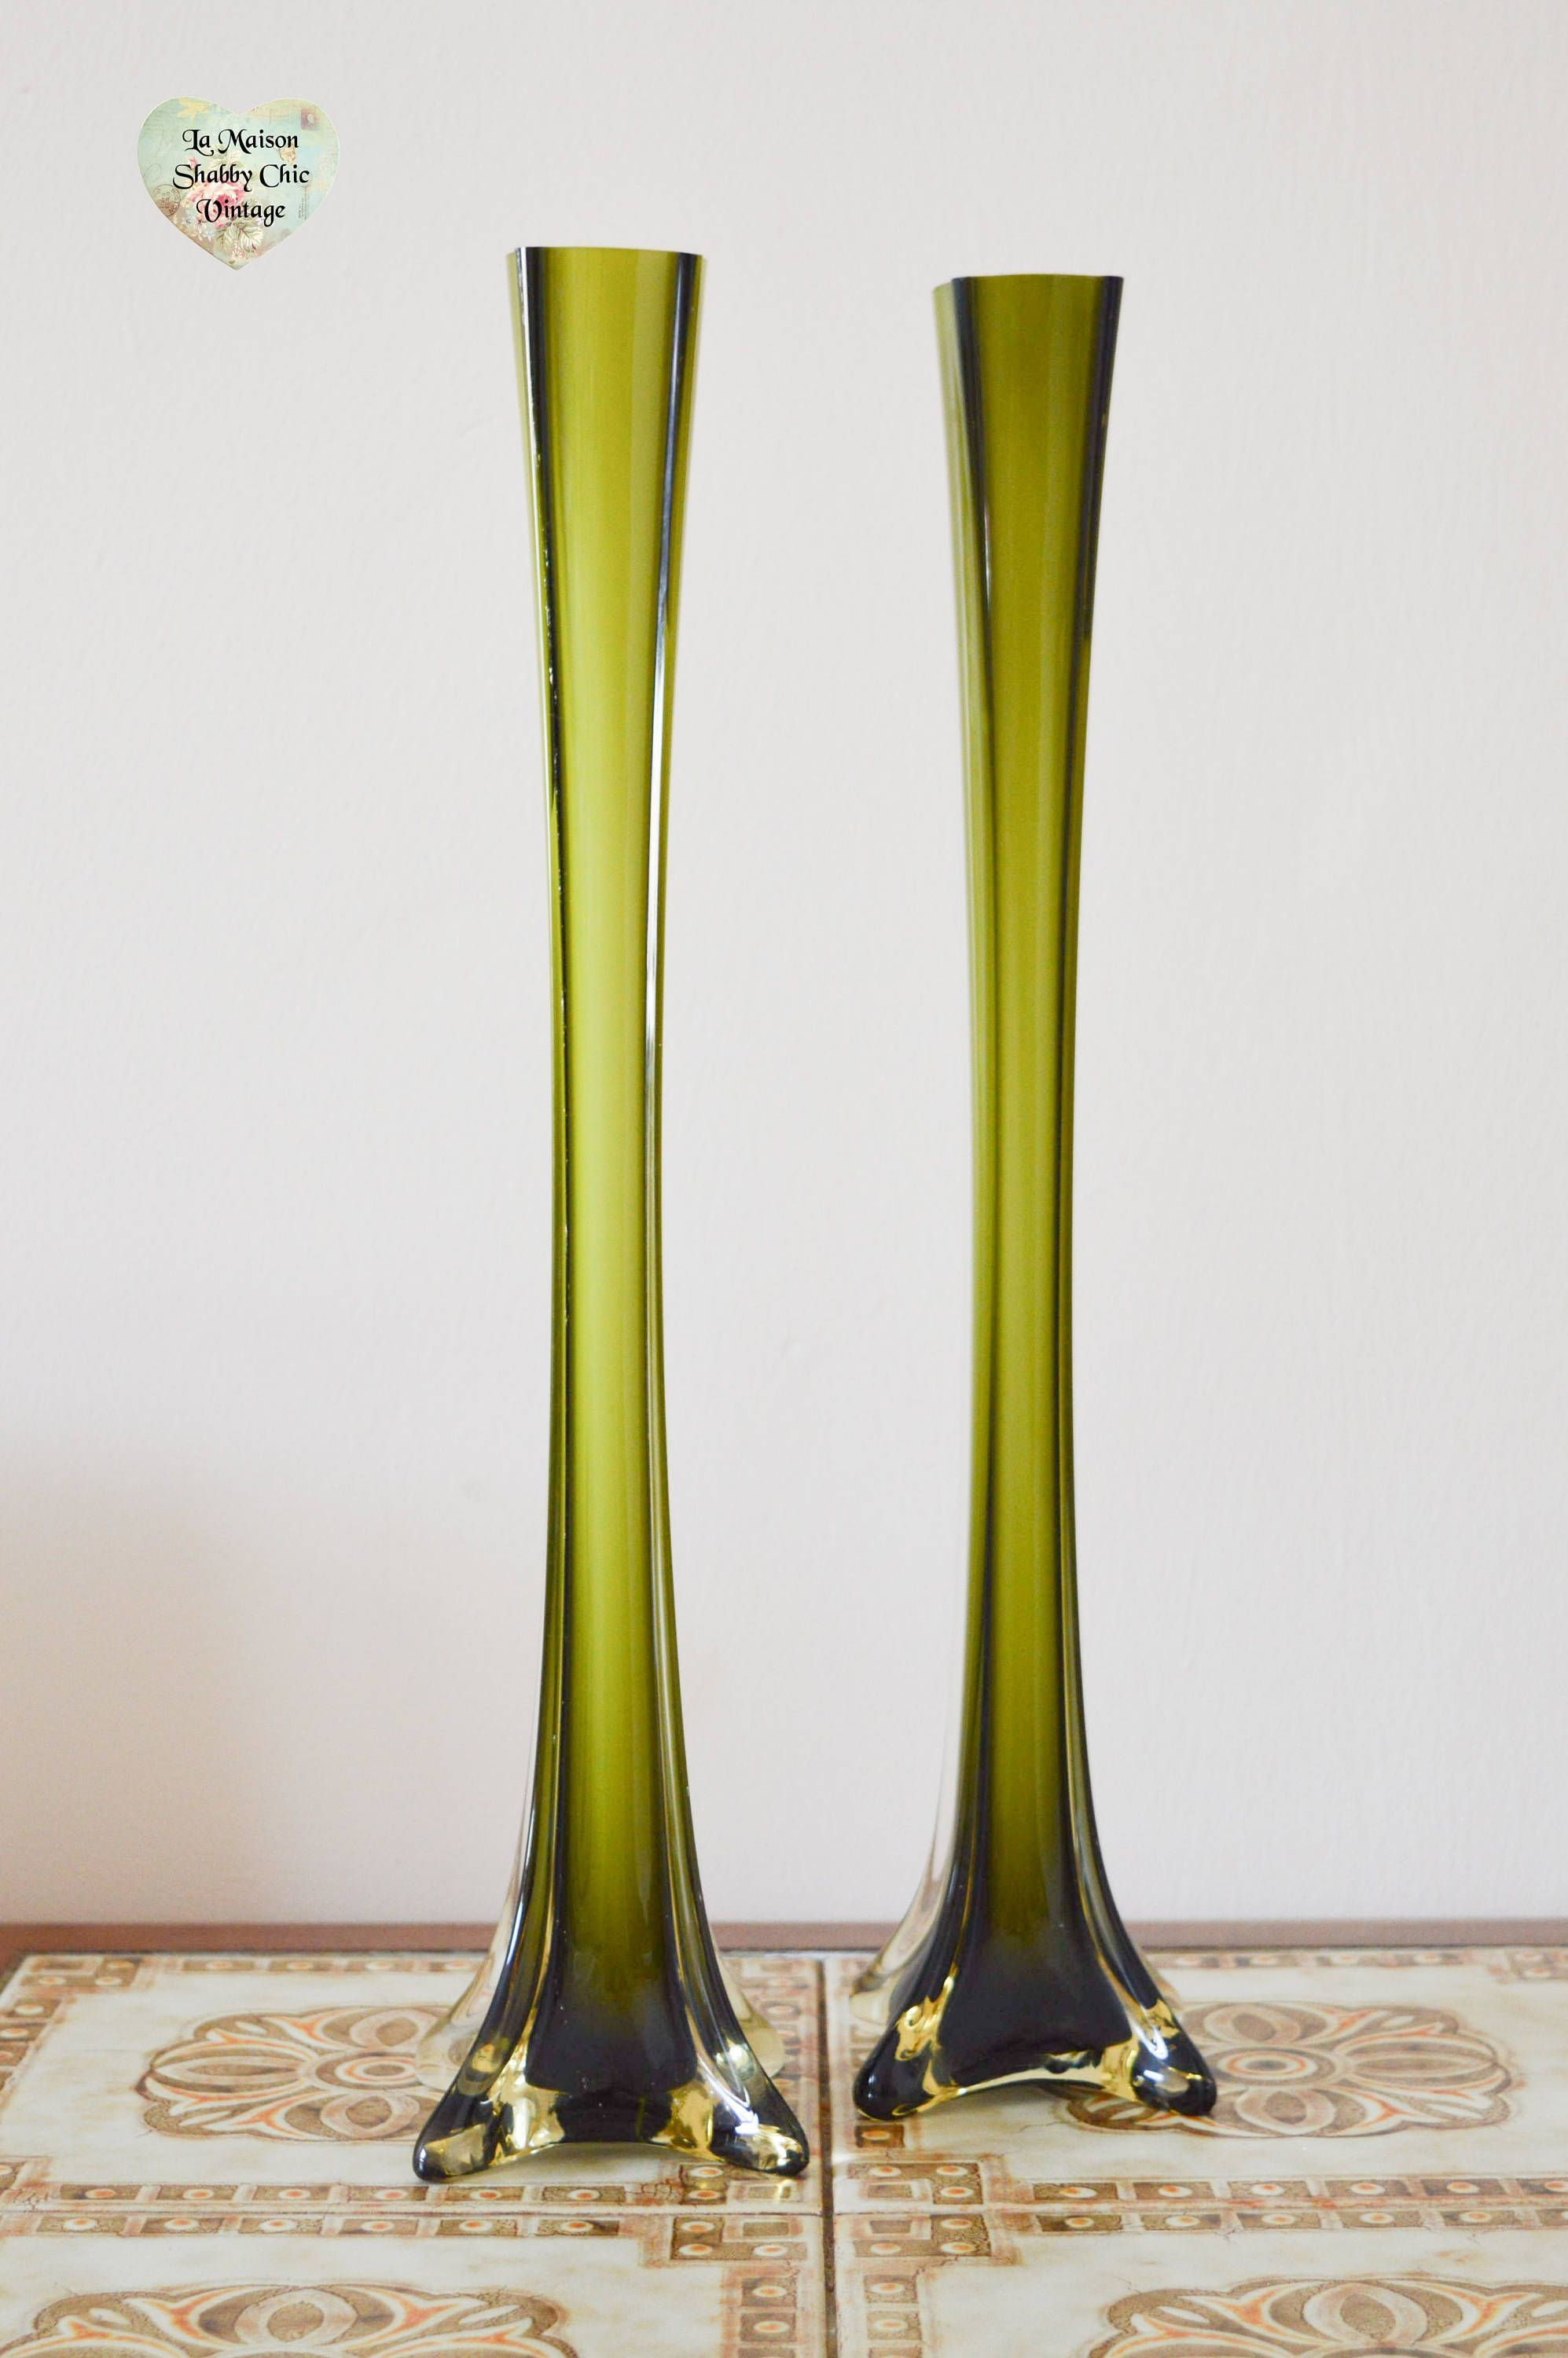 27 attractive Peach Glass Vase 2024 free download peach glass vase of 35 antique green glass vases the weekly world with regard to retro skinny glass vases pair 2 shades of green retro flower vases